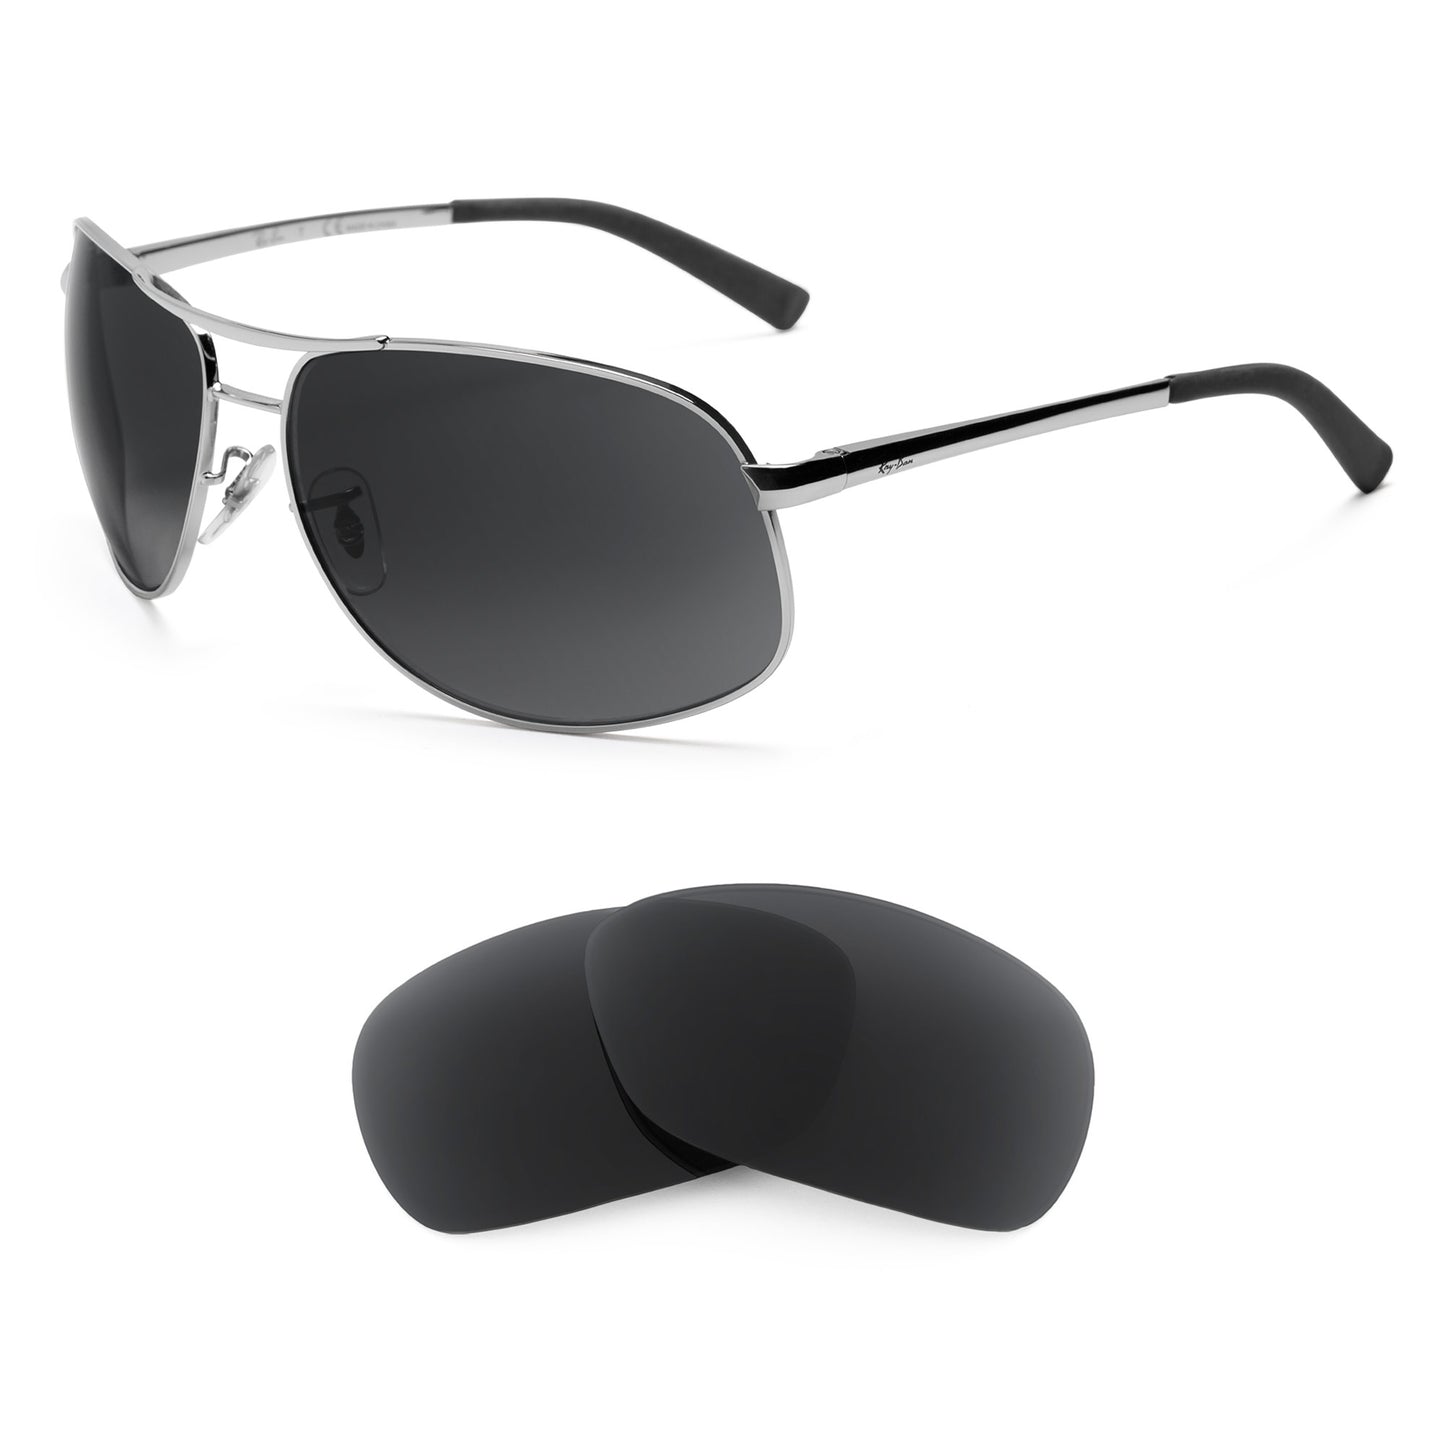 Ray-Ban RB3387 64mm sunglasses with replacement lenses